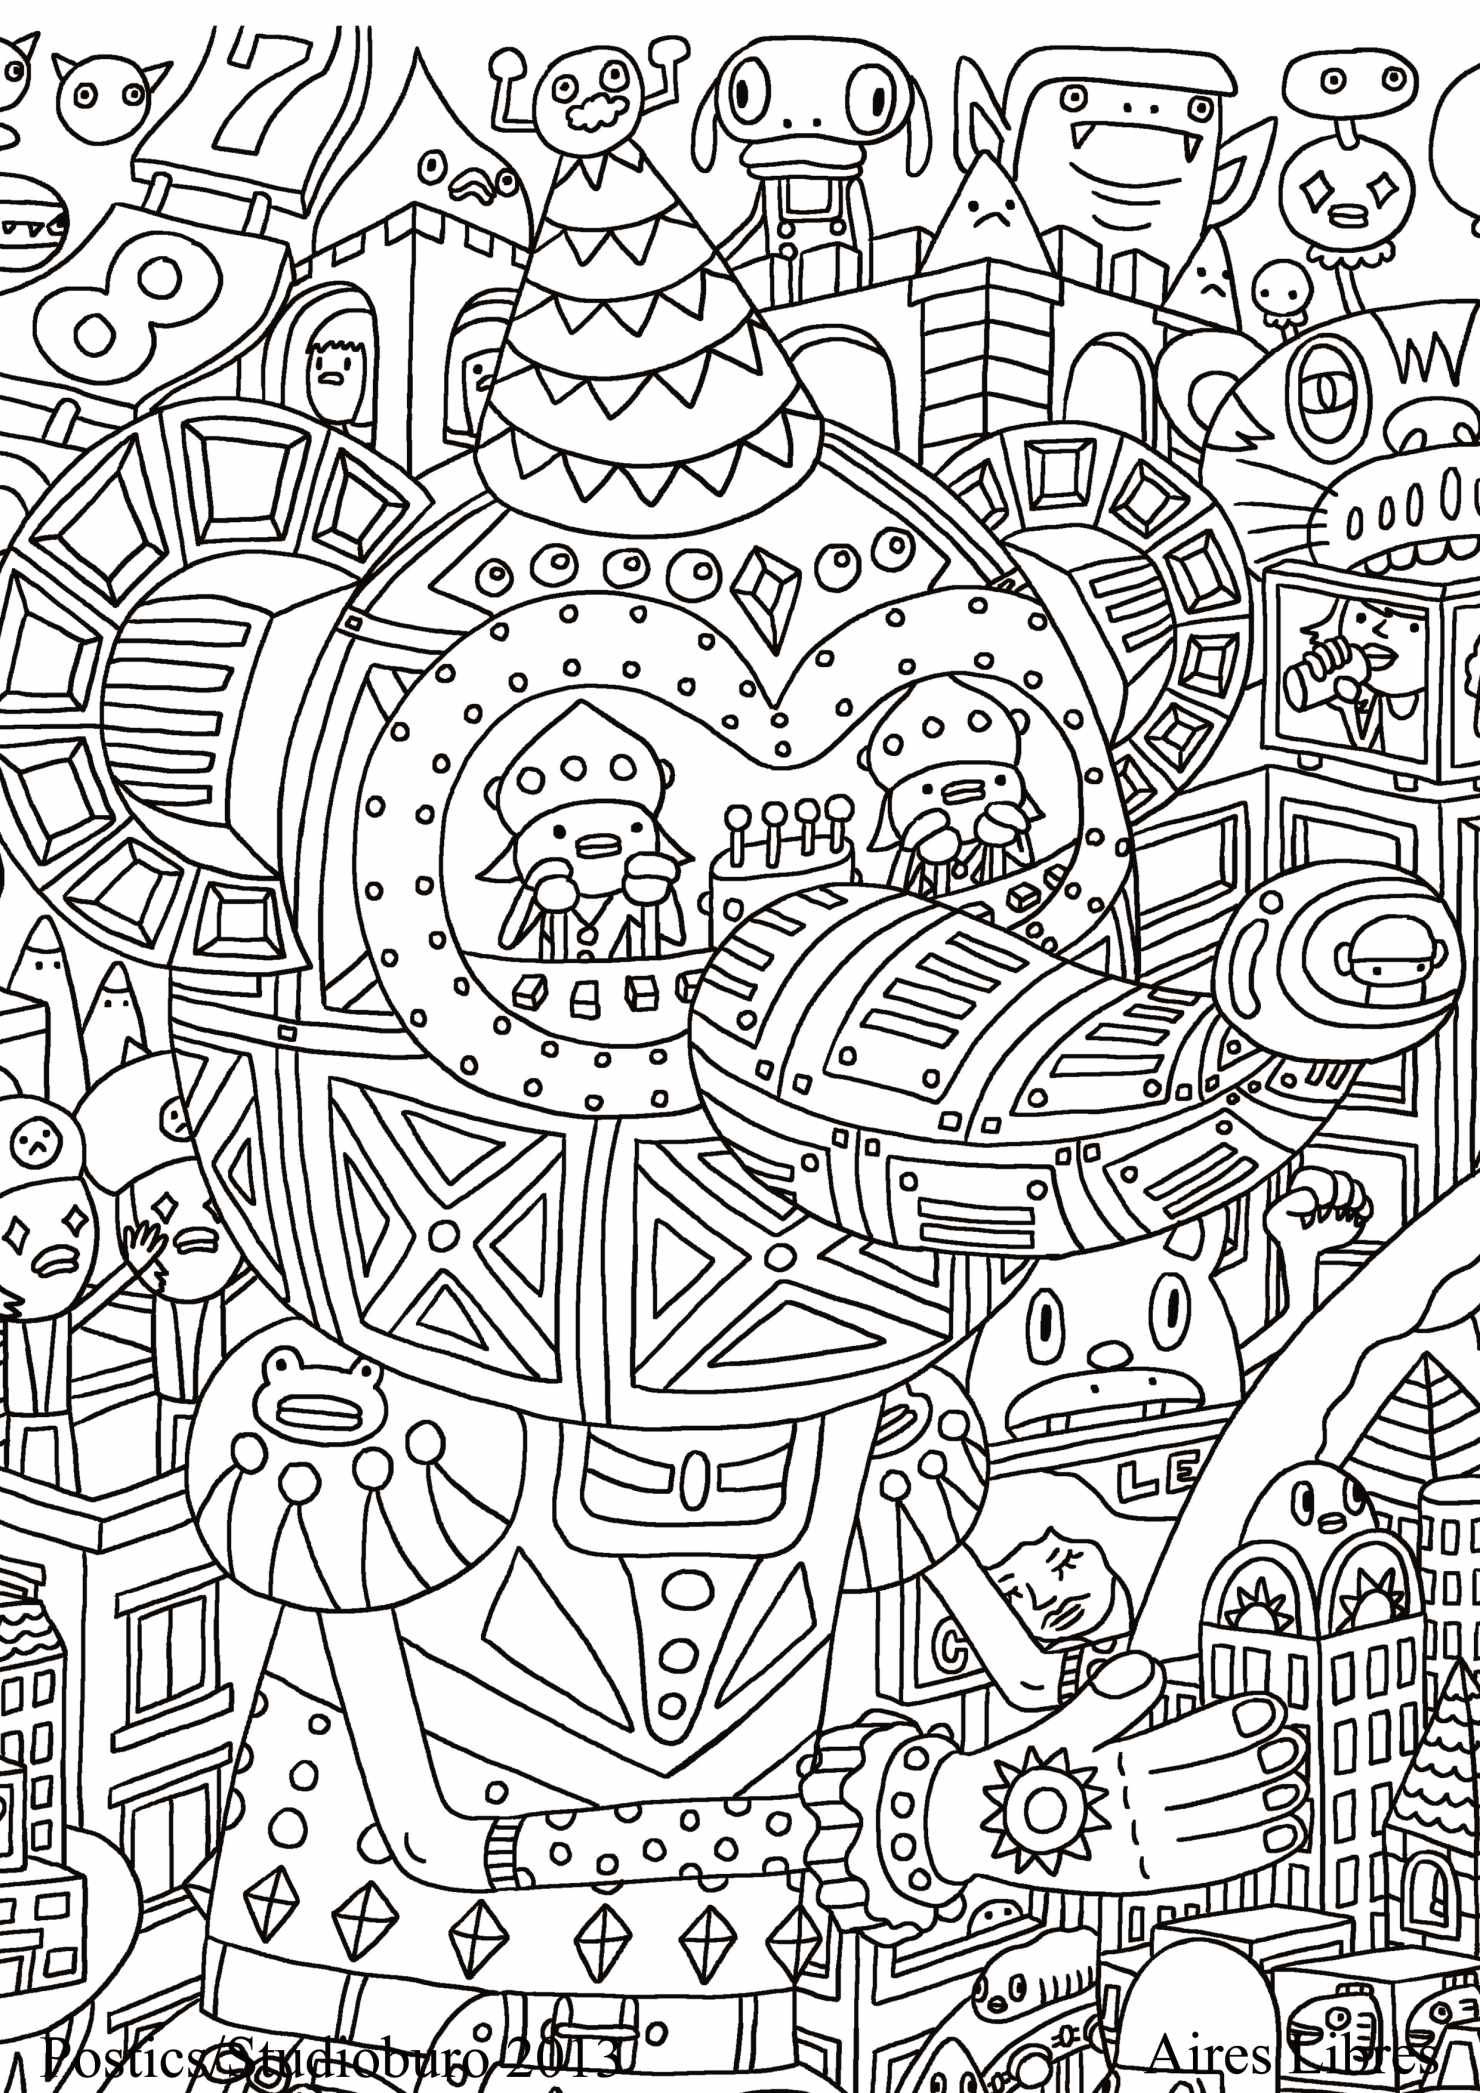 Free Adult coloring page to print and color, for kids